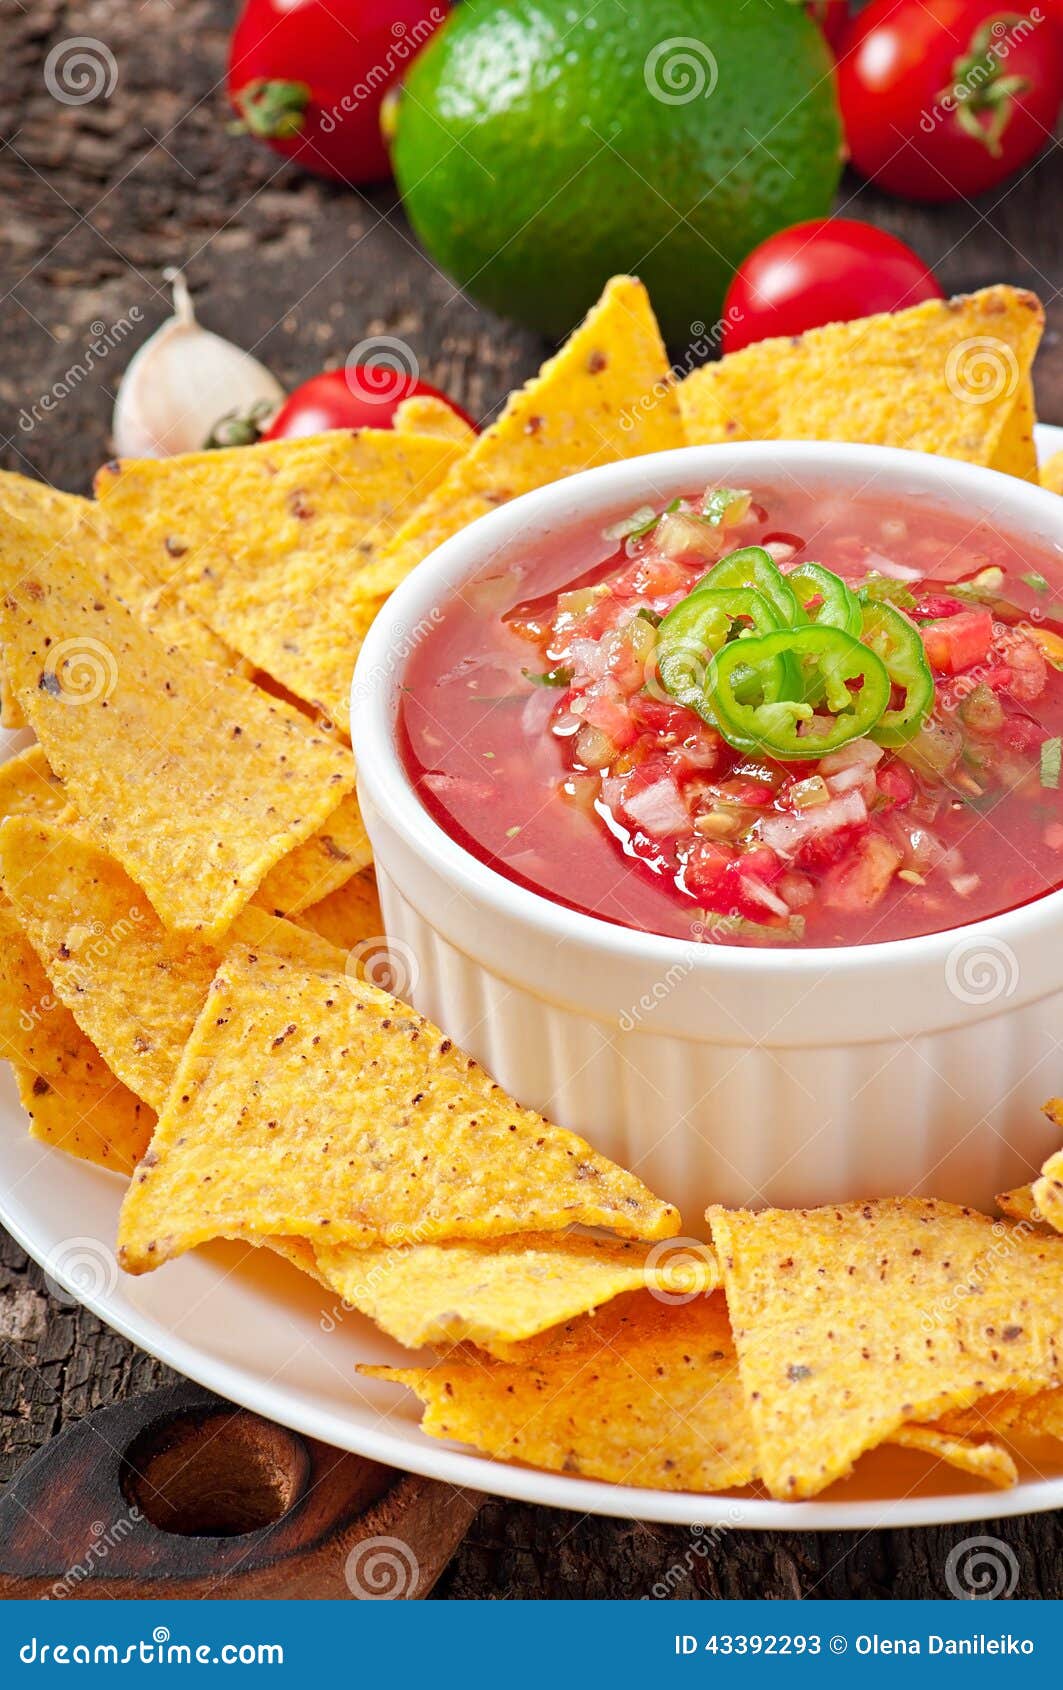 Mexican Nacho Chips and Salsa Dip Stock Image - Image of food, closeup ...